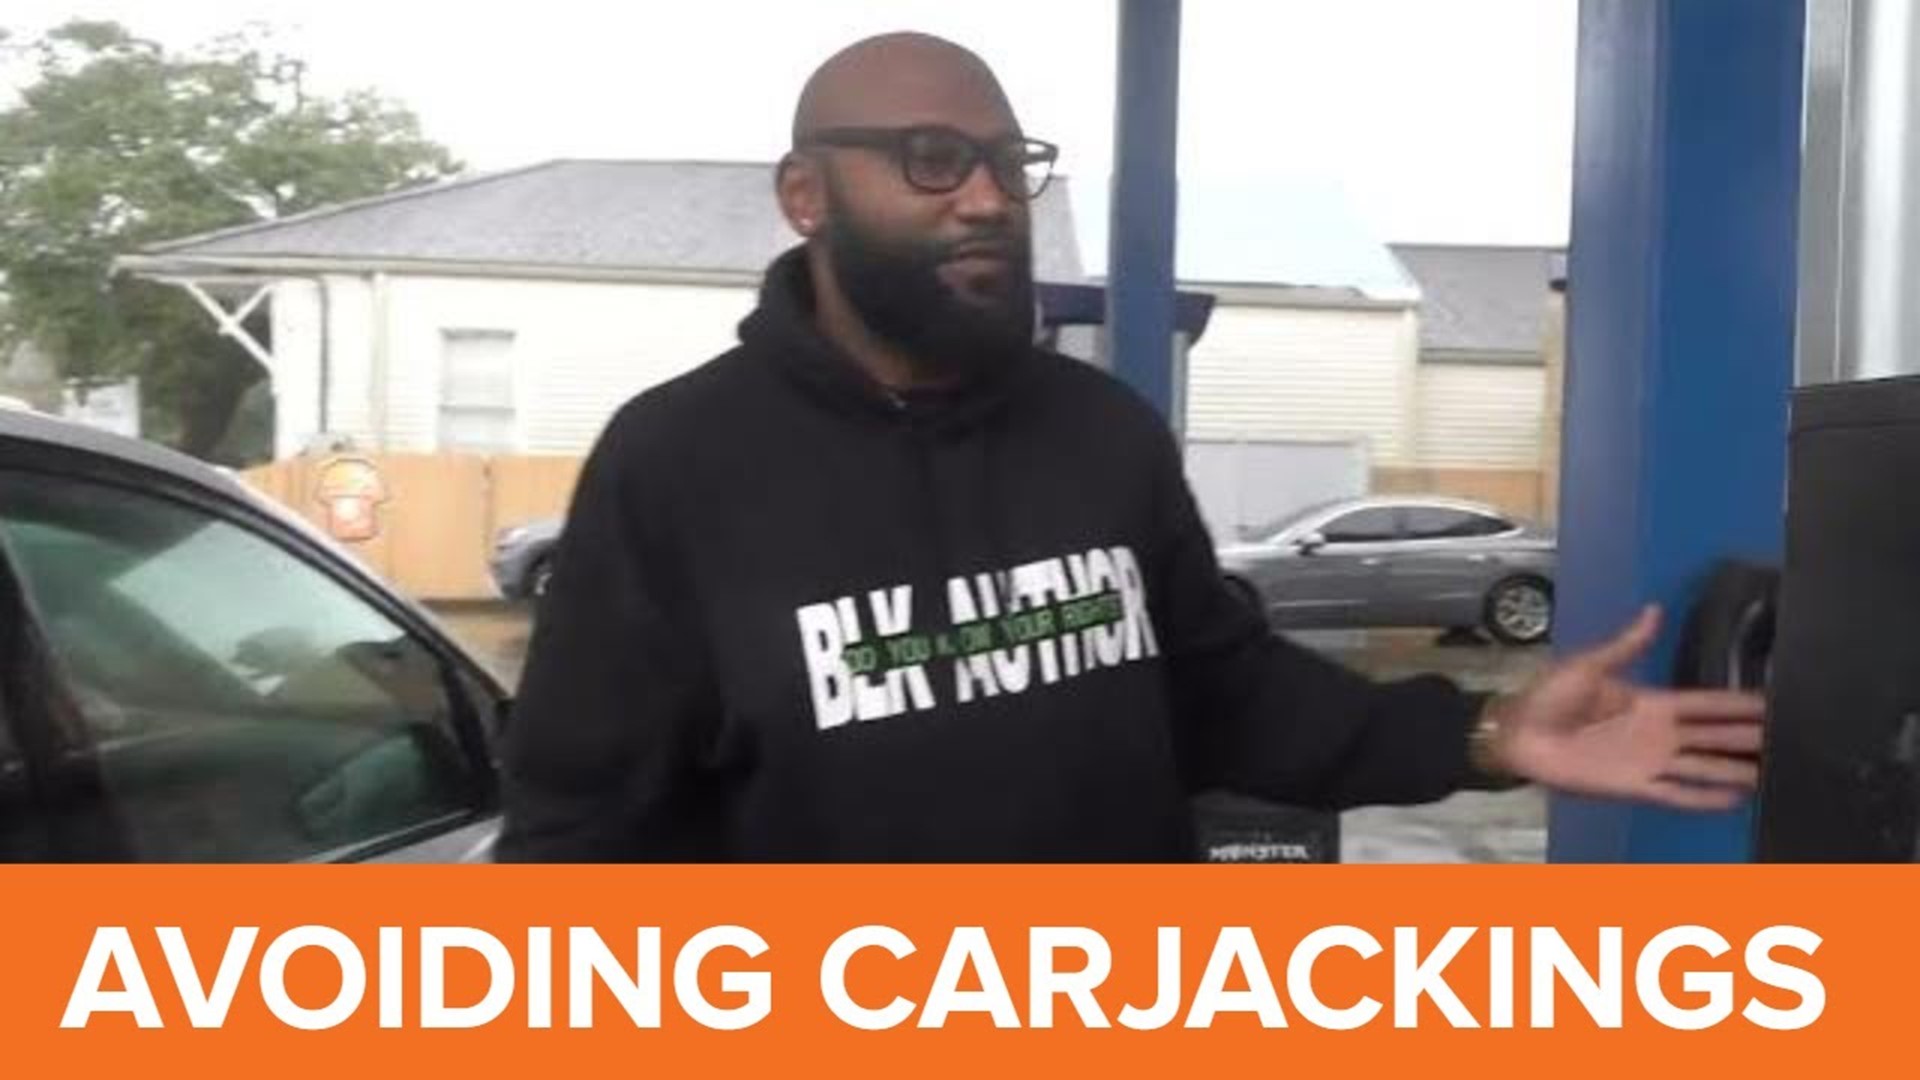 A former NOPD officer shares tips if you want to avoid carjacking or what to do if you are in the situation.